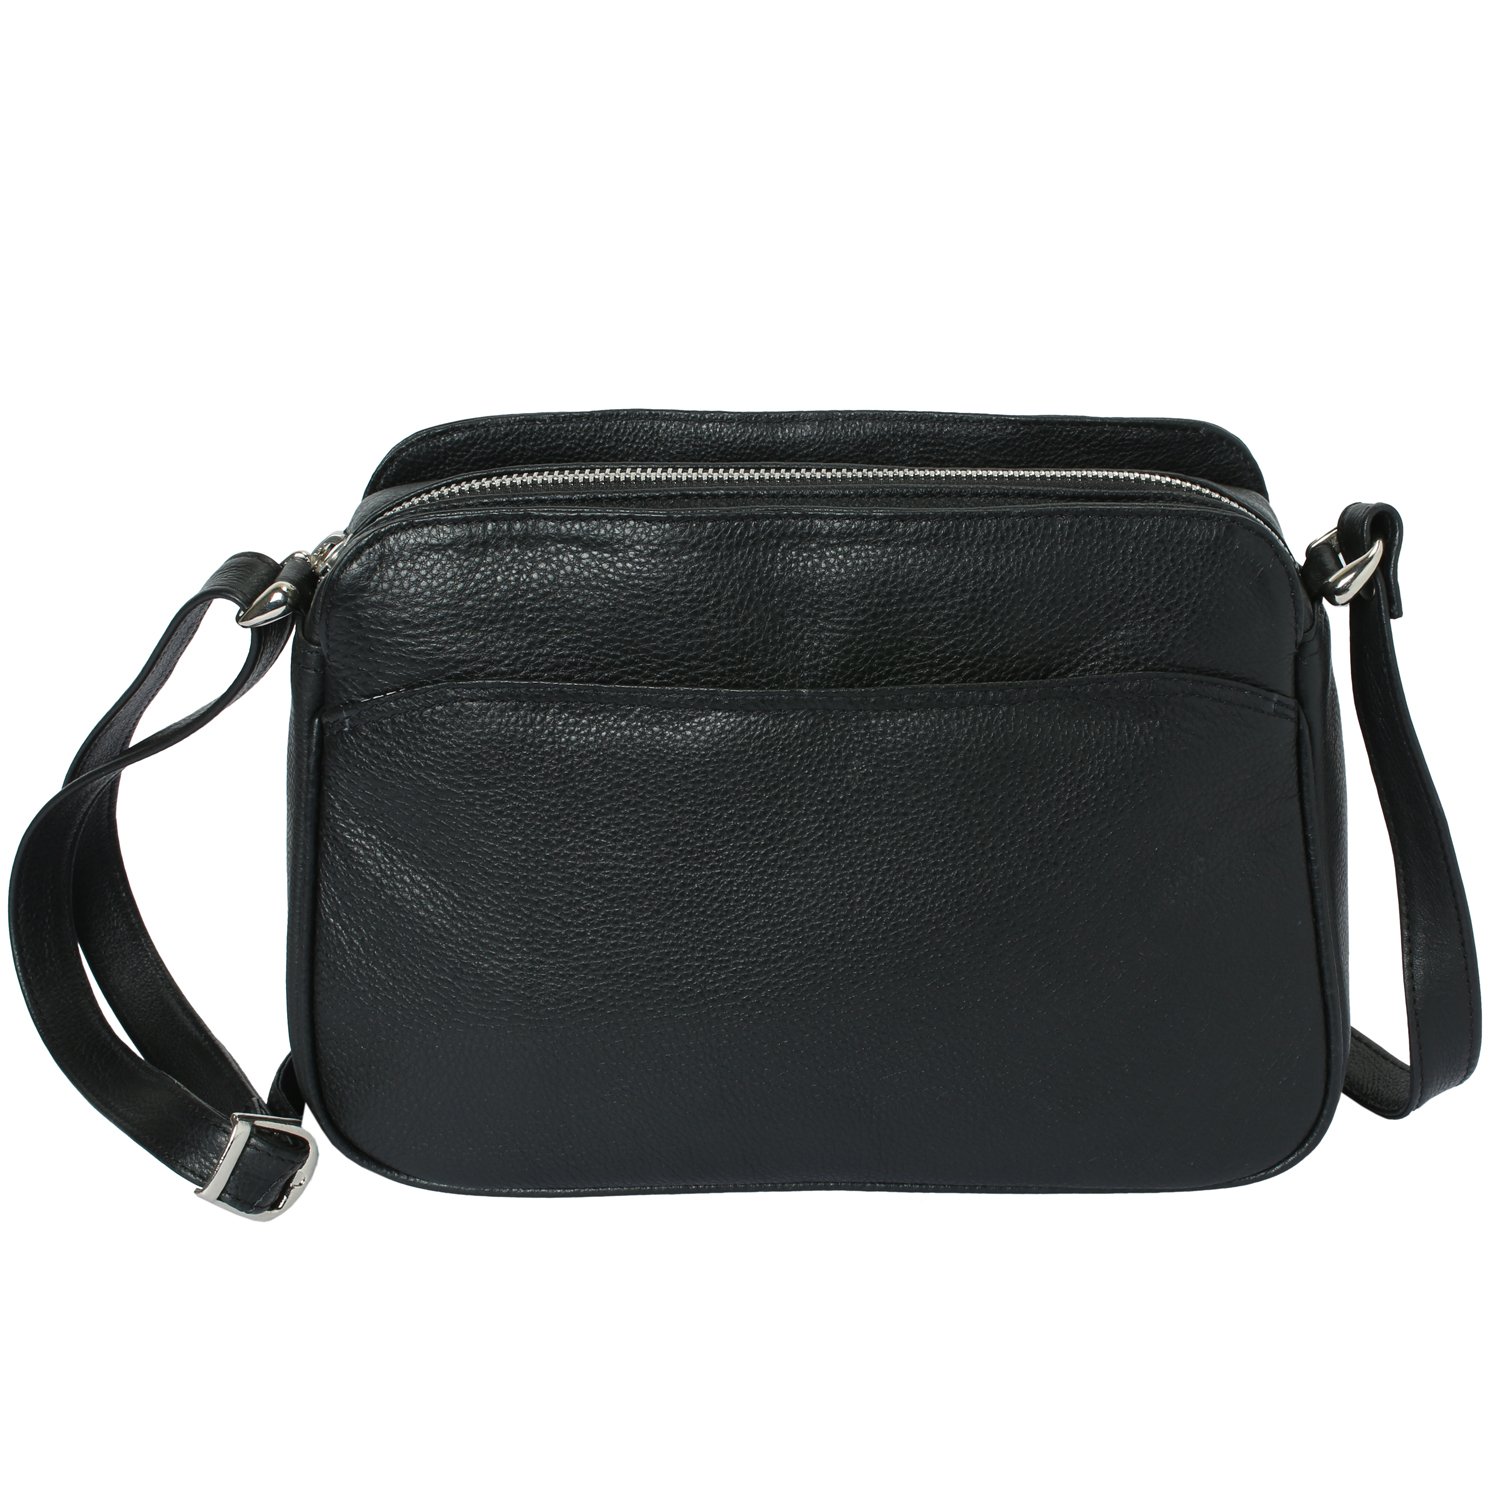 pure leather purse for ladies